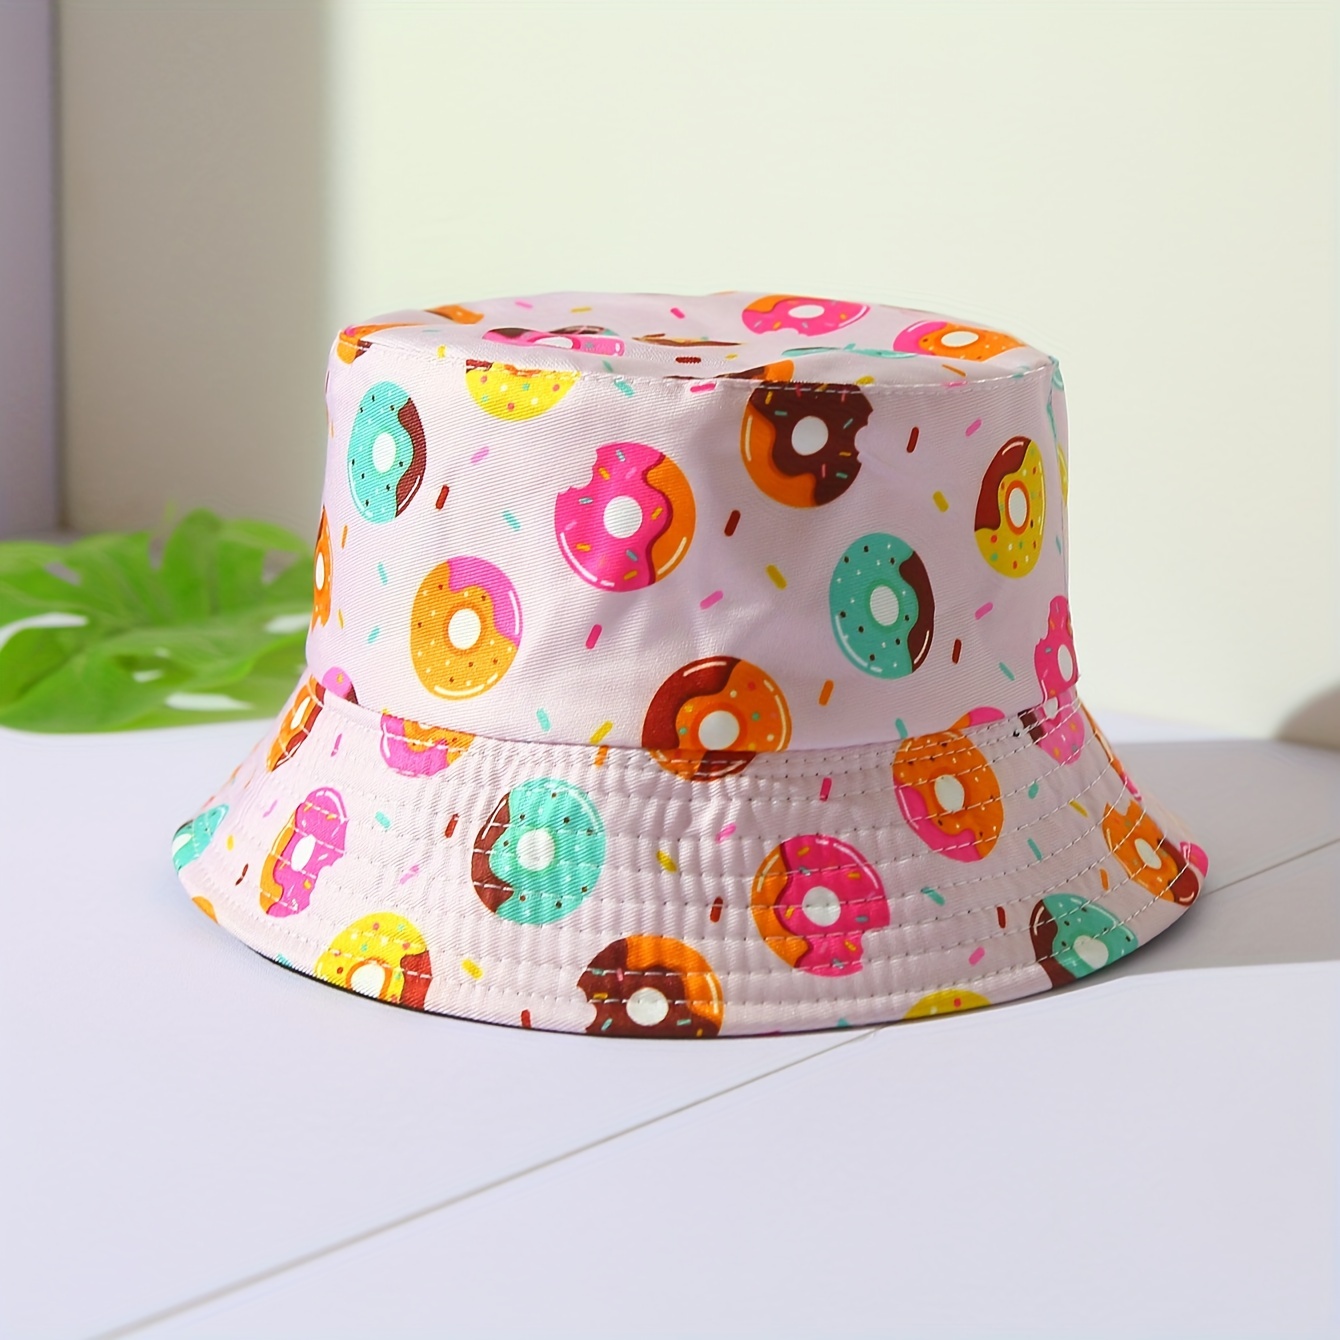 

1pc Colorful Double-sided Print Donut Bucket Hats For Couples, Kids, And Adults In Spring And Summer Seasons. Versatile And Stylish Hats For Fashionable And Comfortable Wear.